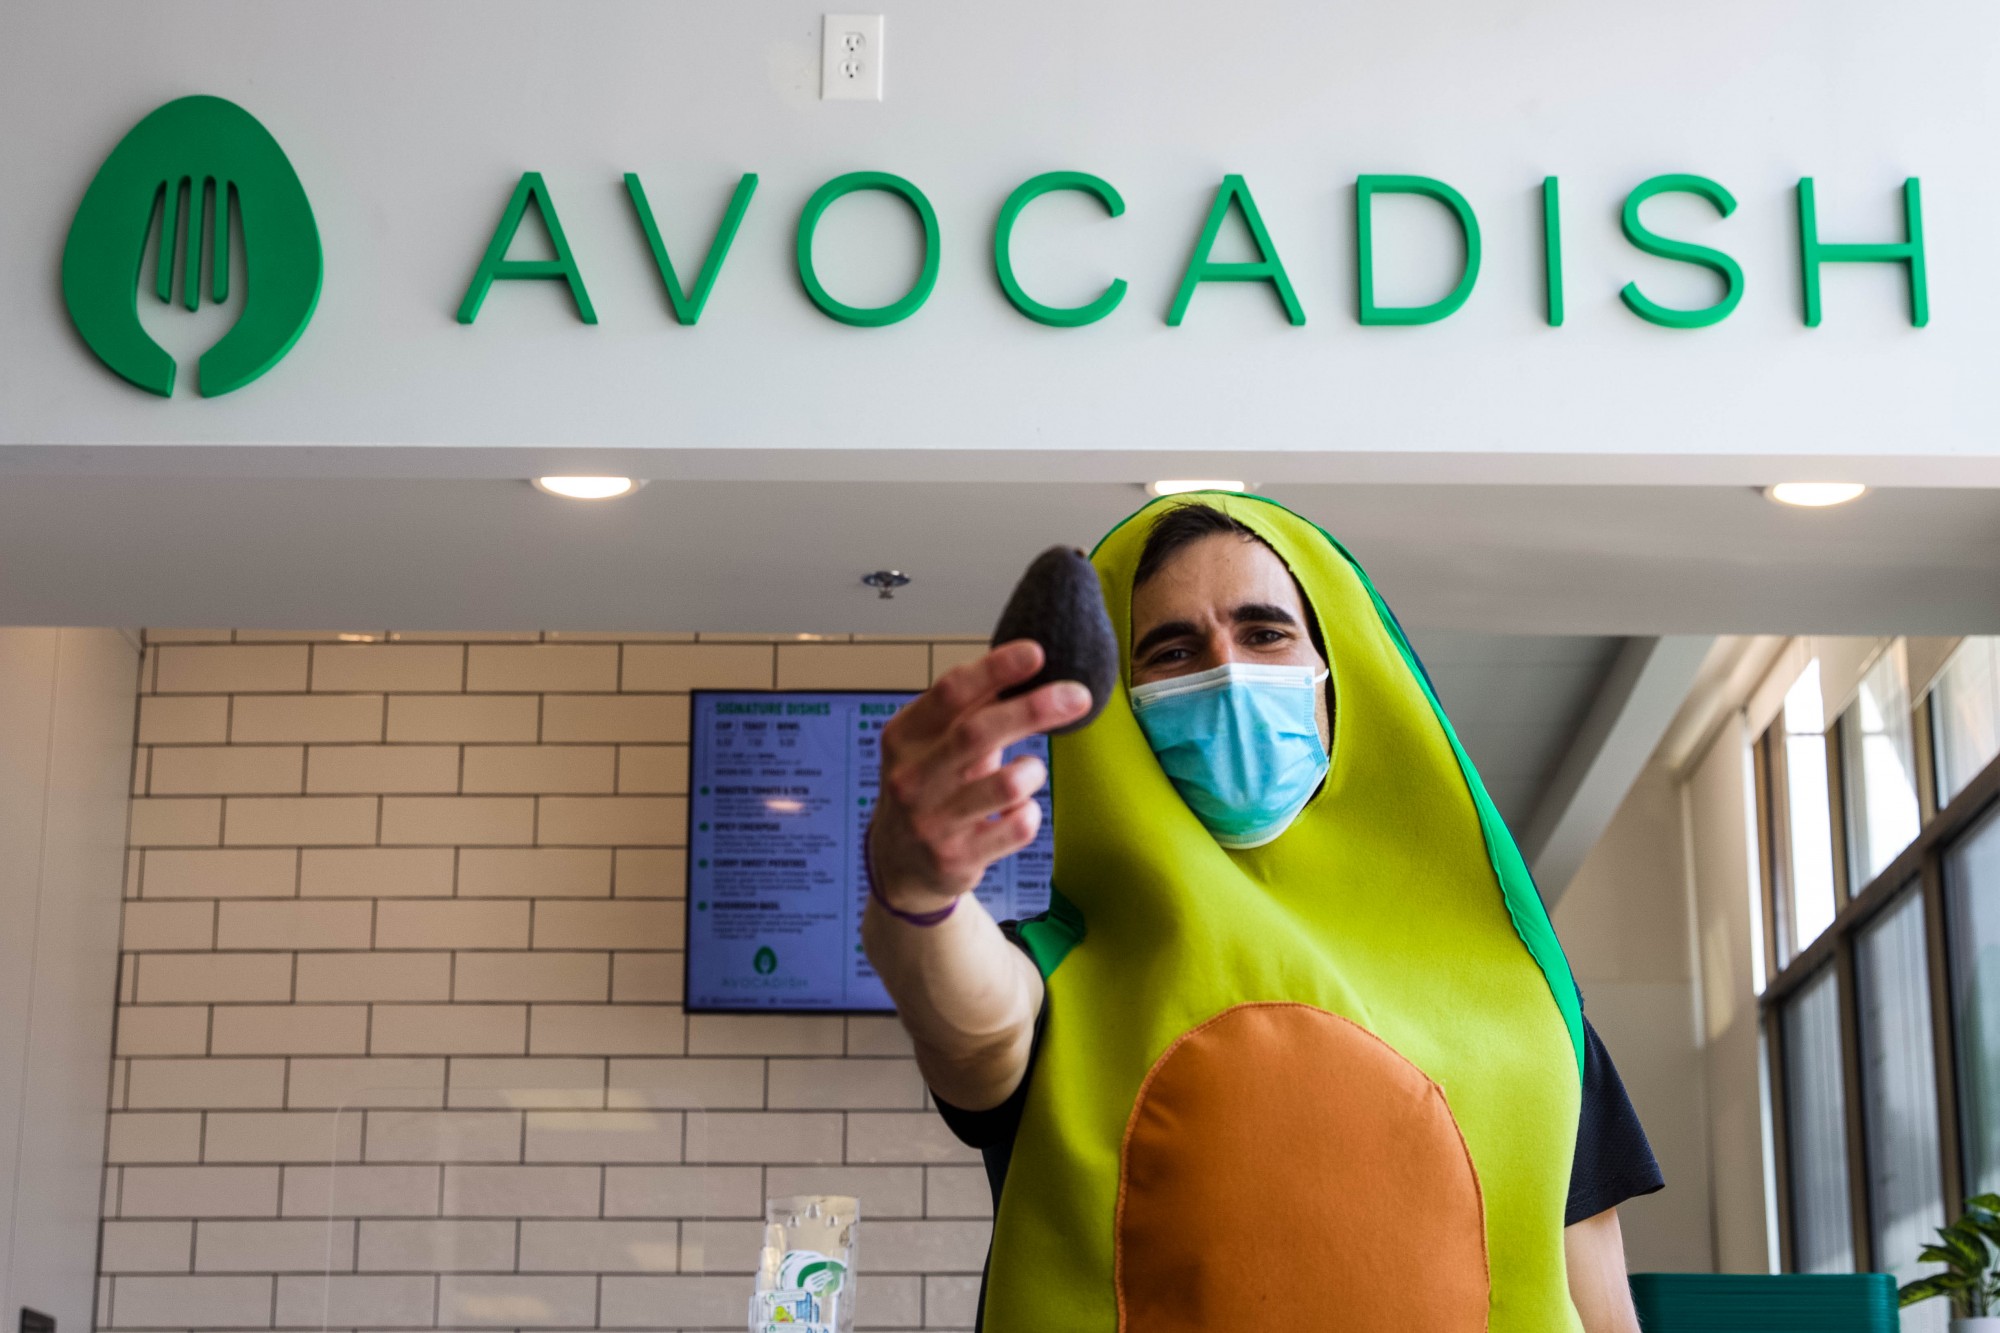 Alex Varouhas shows off an avocado while posing for a portrait in front of his newly opened restaurant, Avocadish, on Tuesday, June 30. Avocadish is located inside the University Food Hall in Dinkytown.